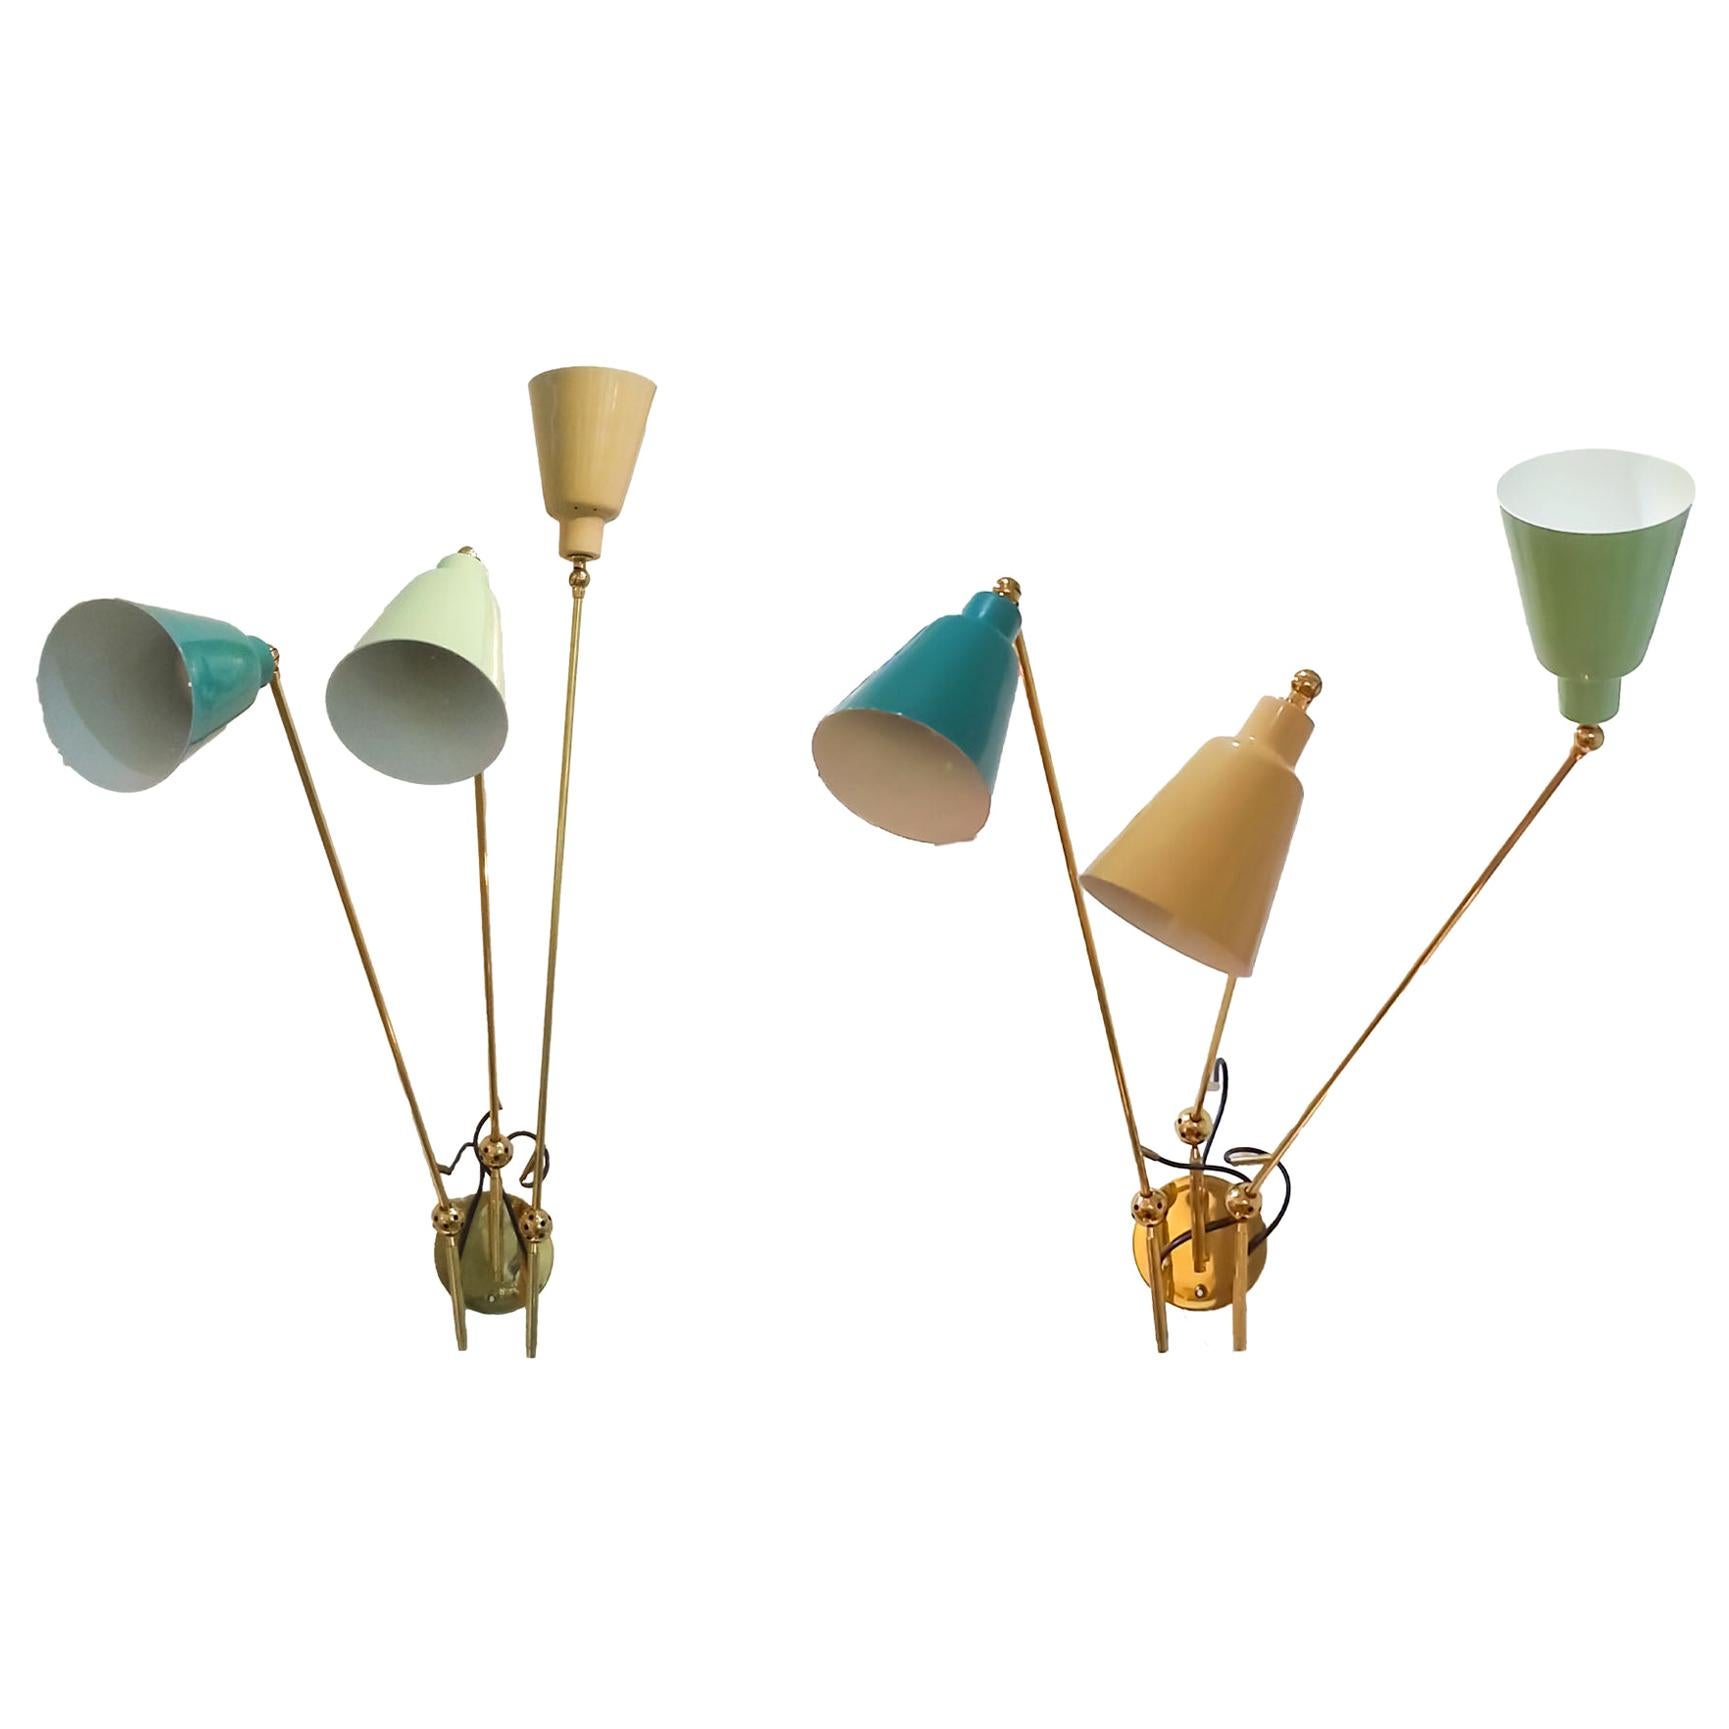 Pair of Enamel and Brass Wall Sconces by Fedele Papagni